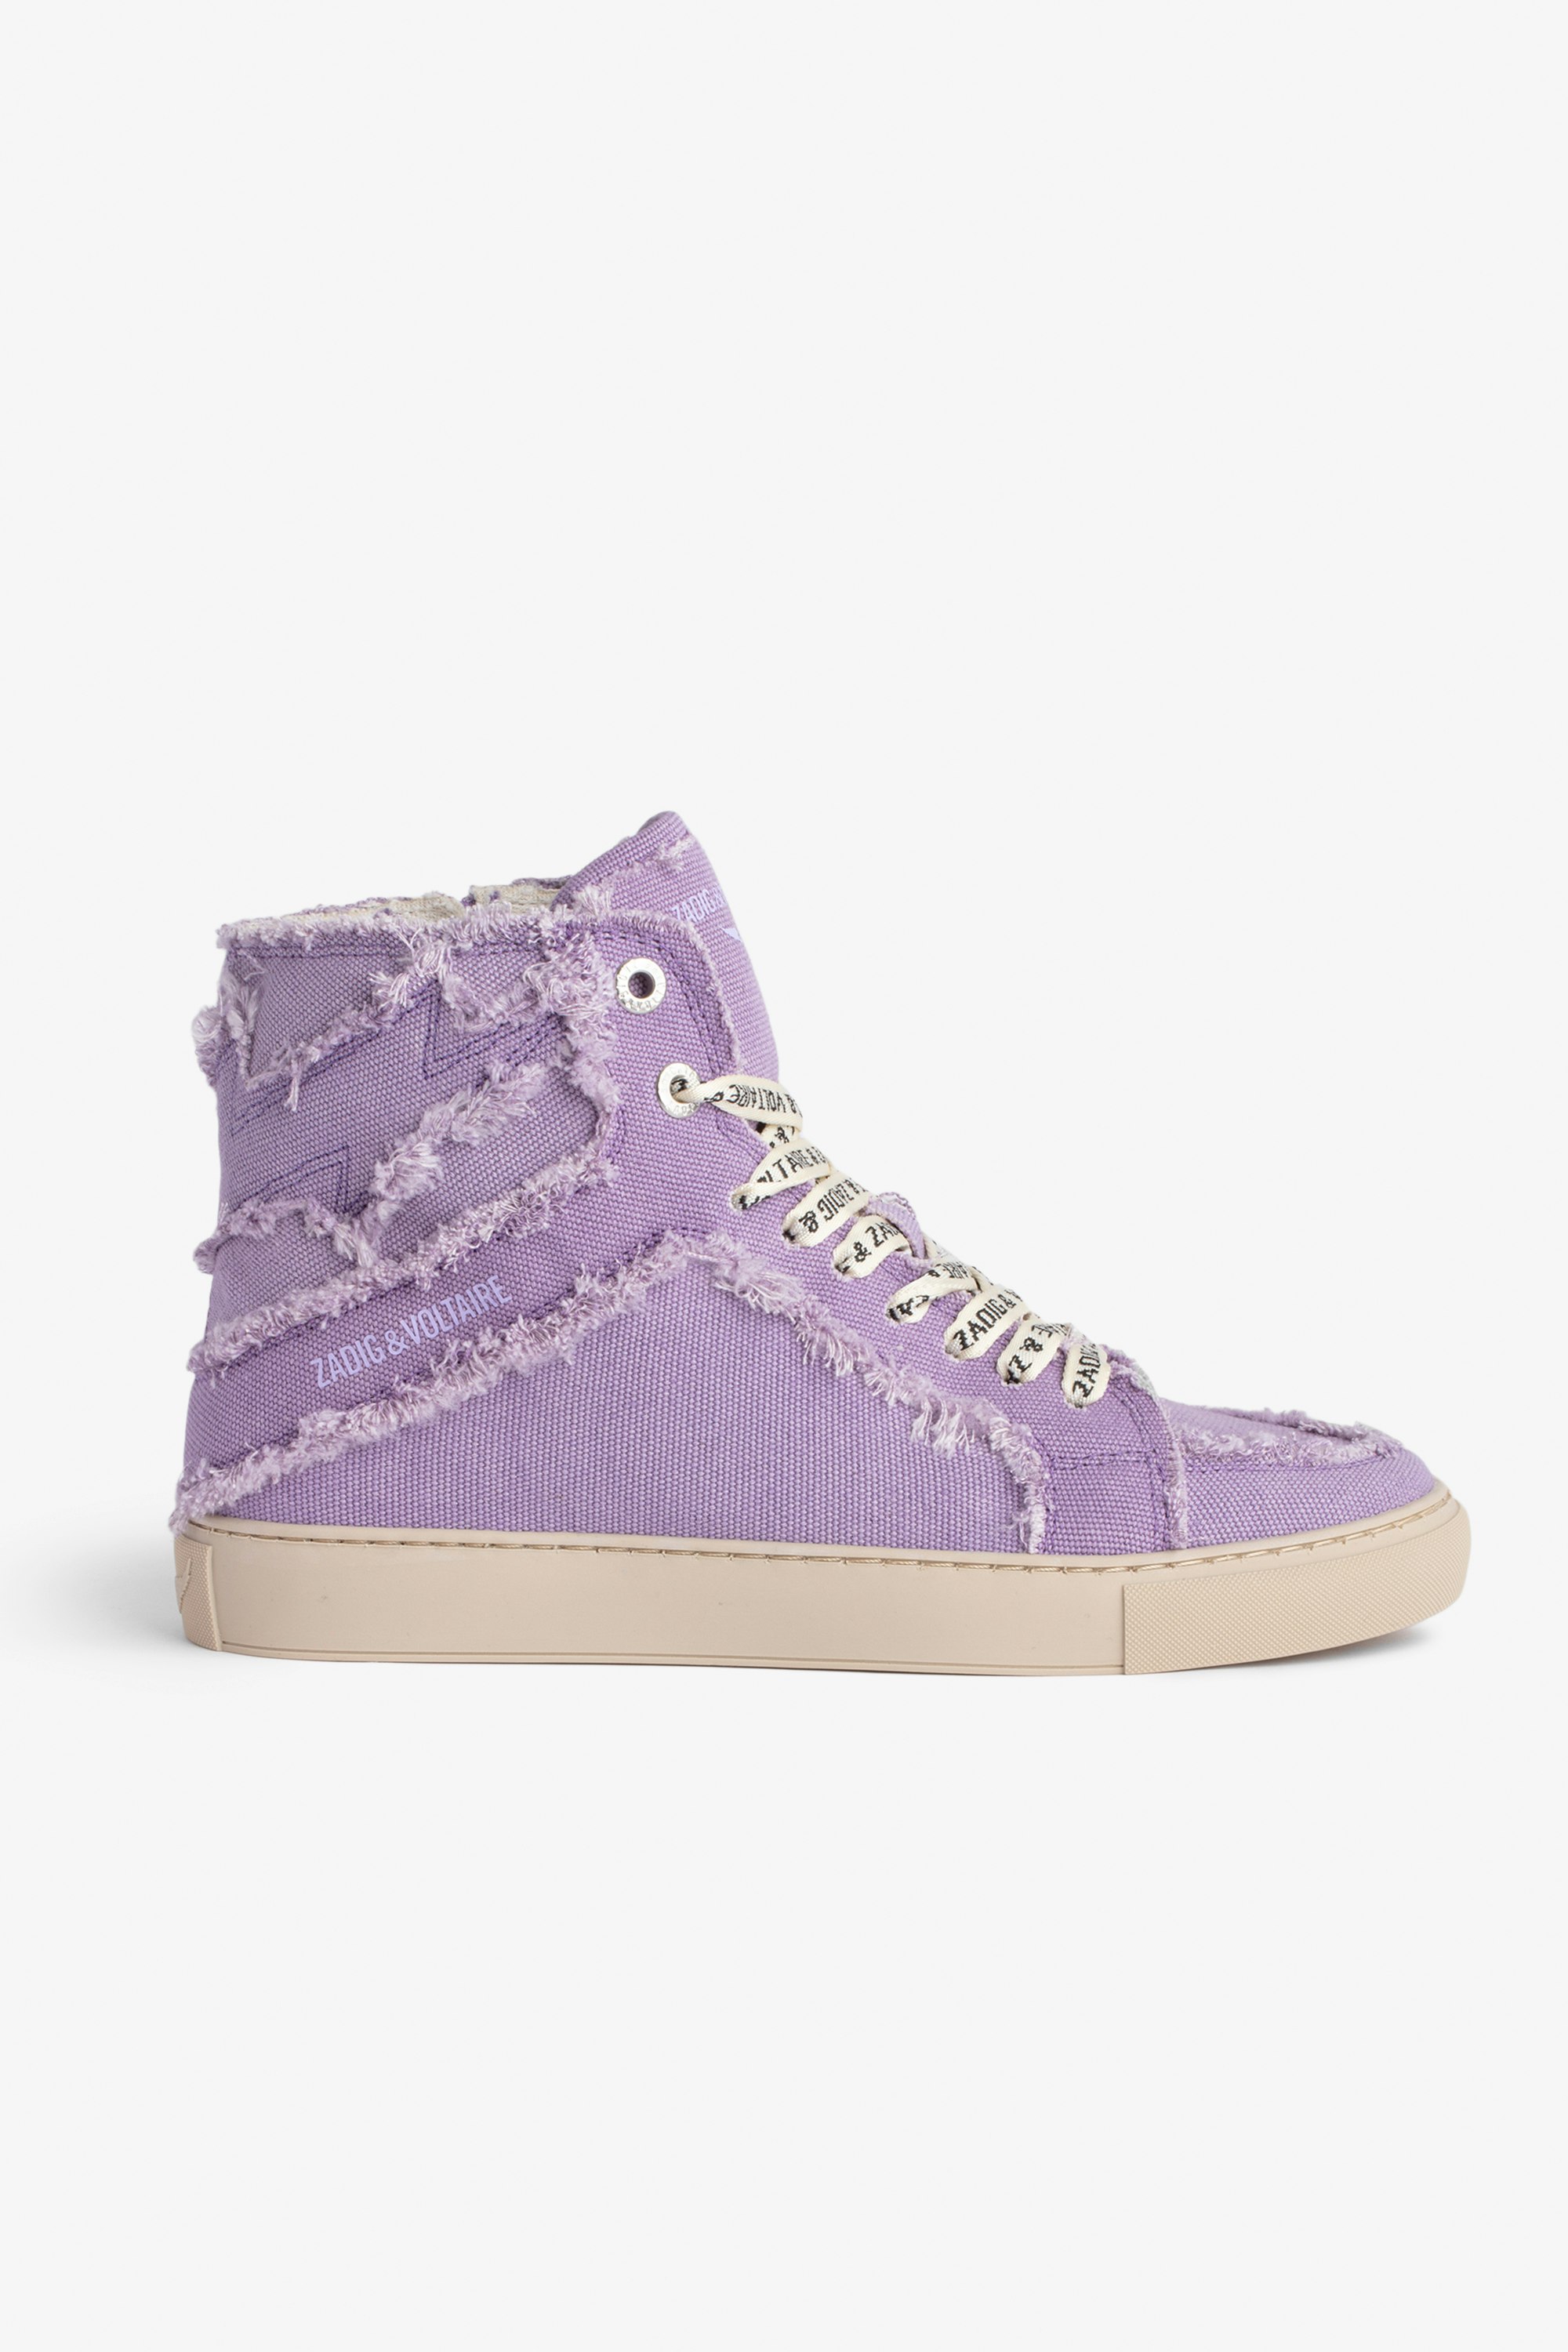 Hohe Sneakers ZV1747 High Flash Hohe Damen-Sneakers aus violettem Baumwoll-Canvas